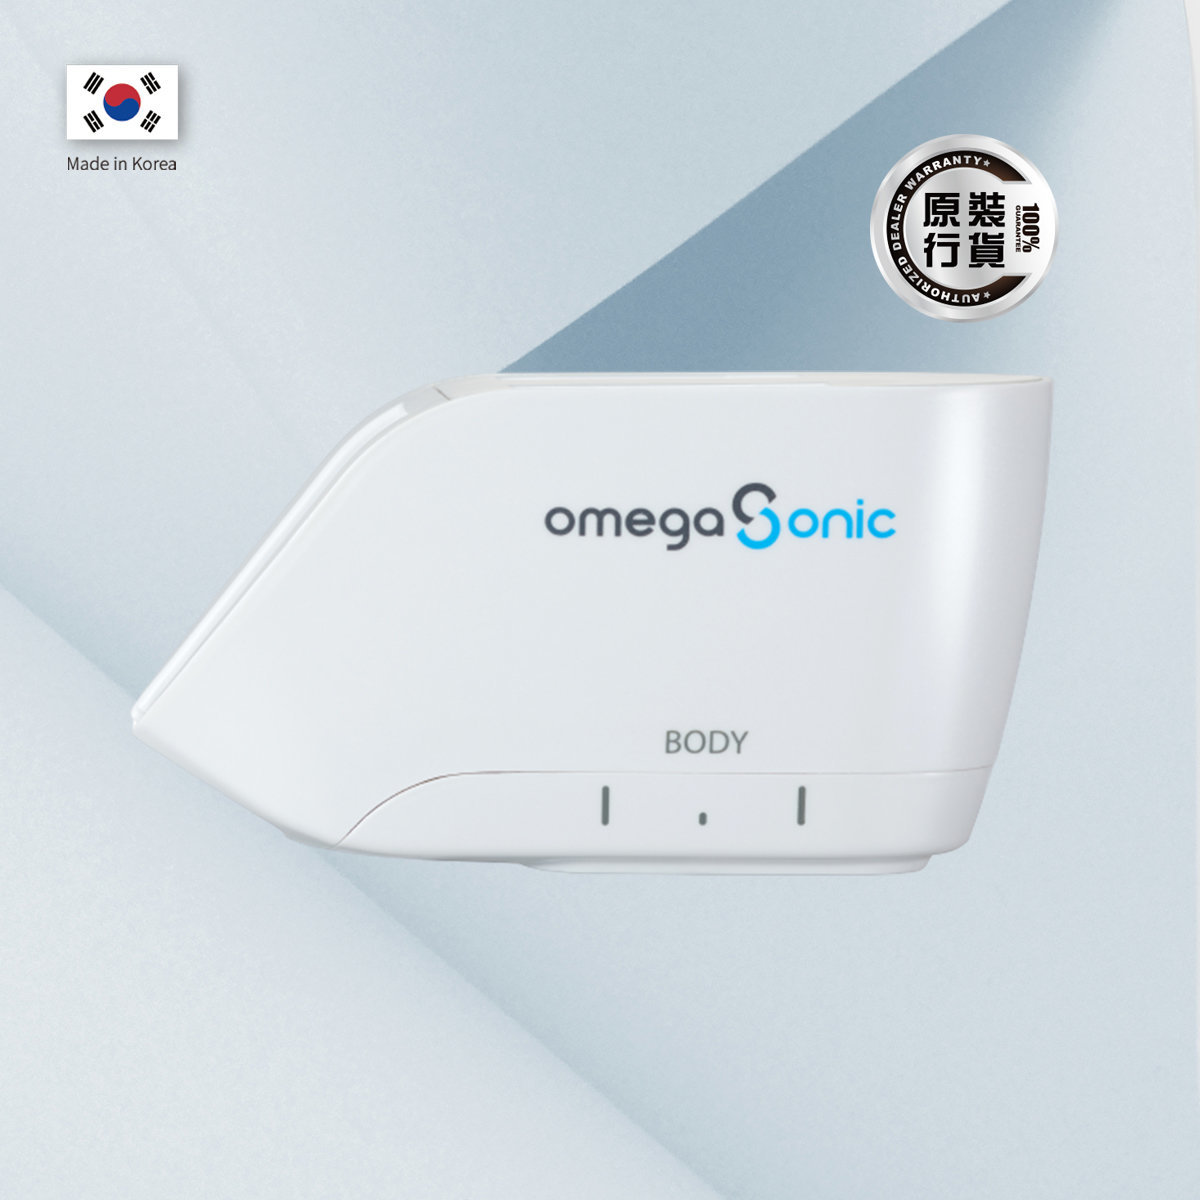 Omega Sonic Queen of Home Aesthetic HIFU device - Cartridge : Body 6.0 mm